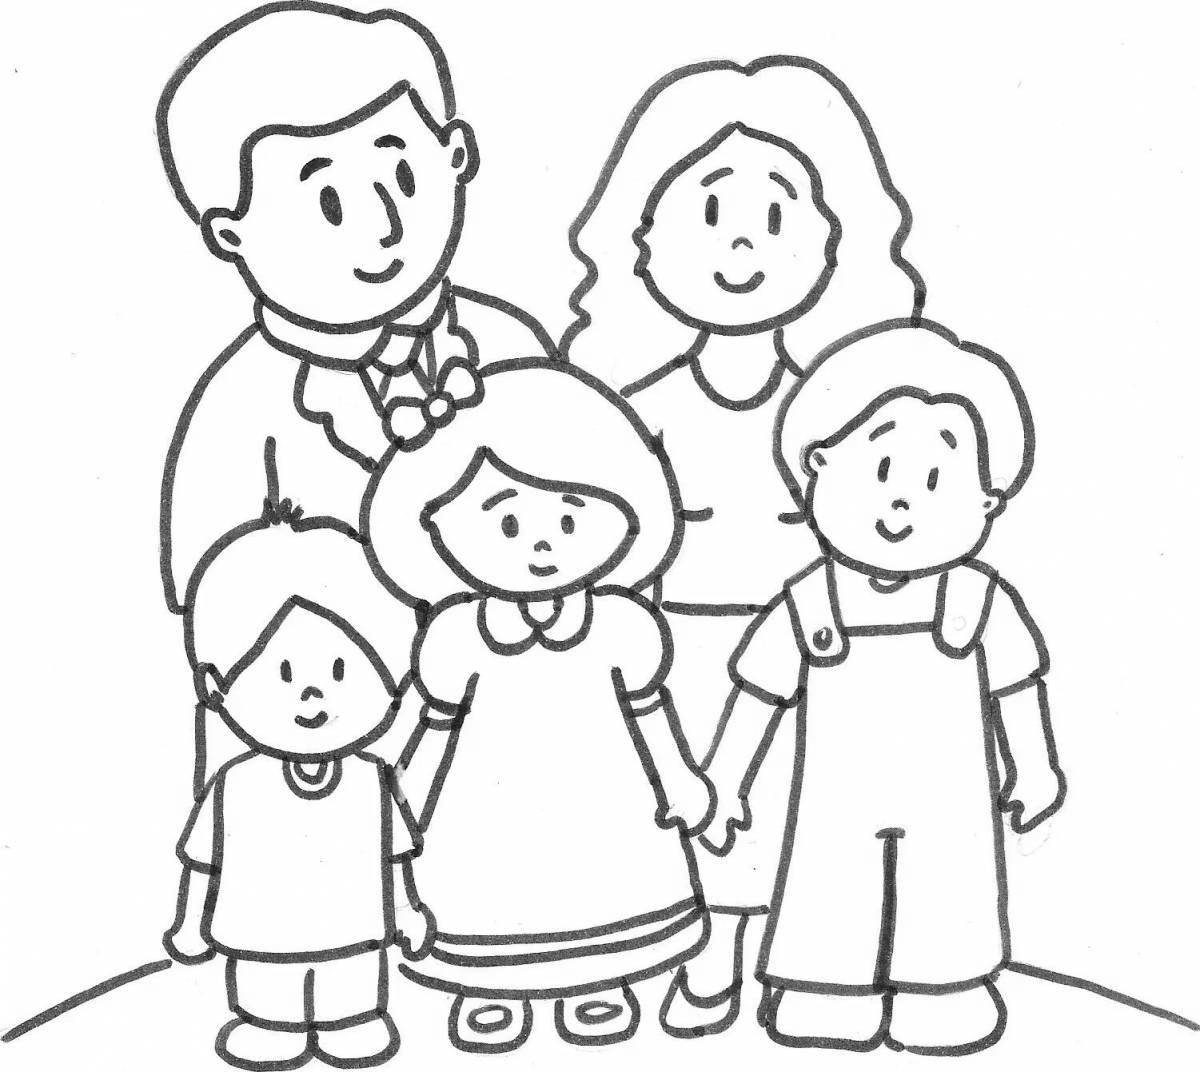 Fun family coloring book for kids